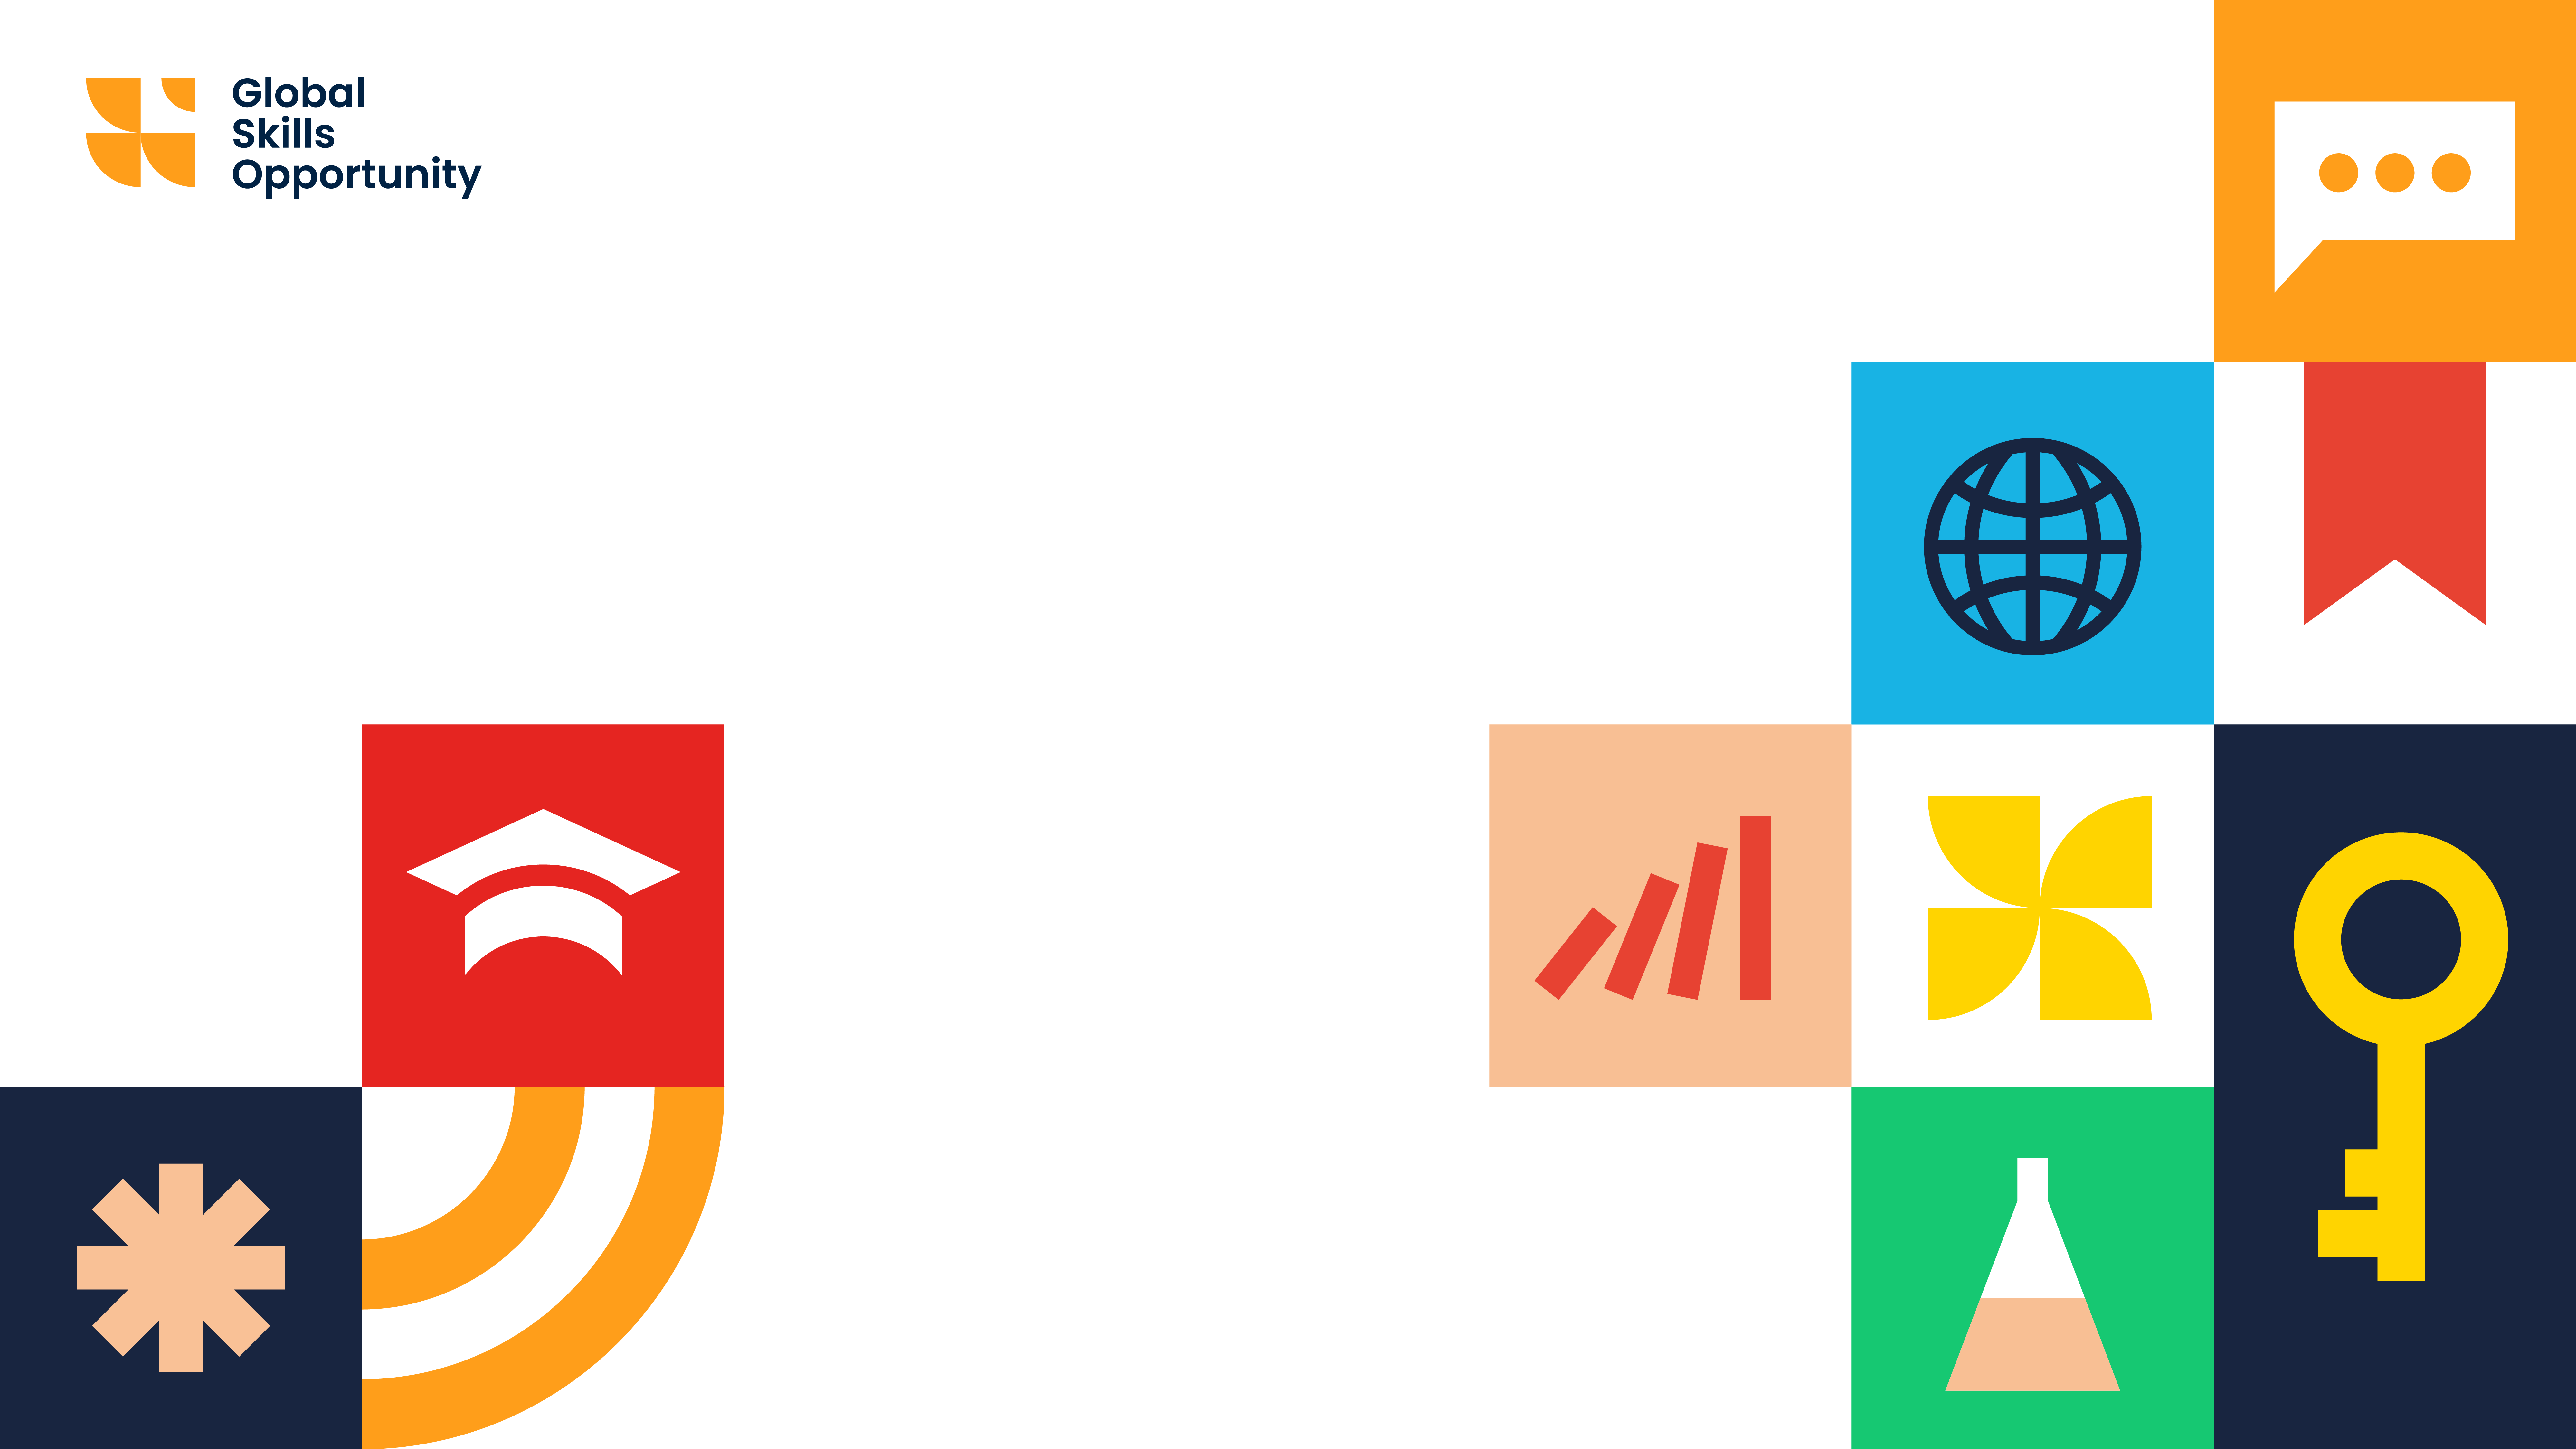 A variety of icons and symbols that represent the Global Skills Opportunity 